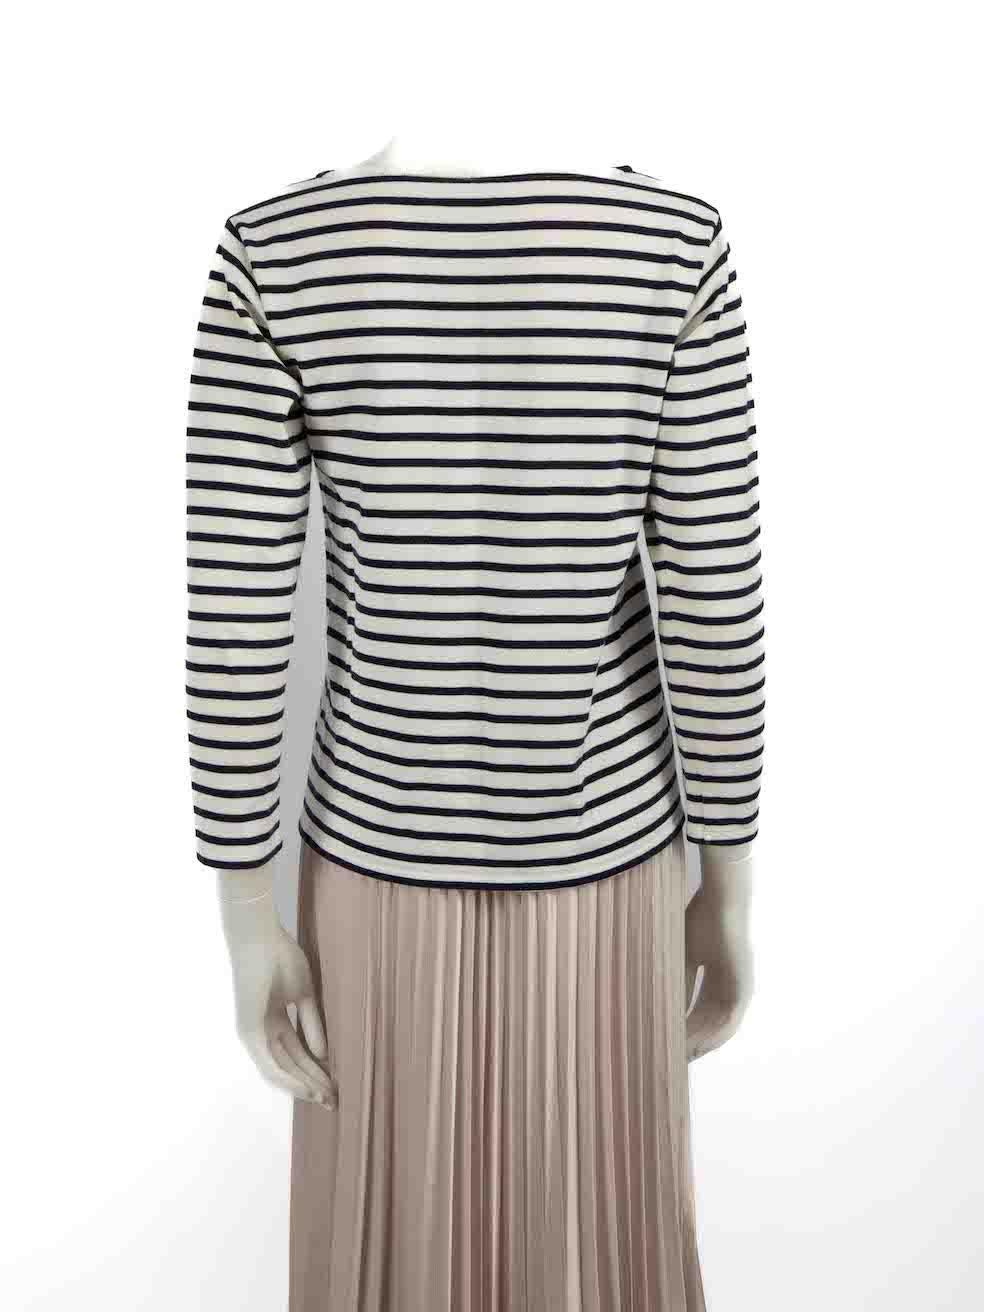 Saint Laurent Striped Long Sleeves Top Size L In Good Condition For Sale In London, GB